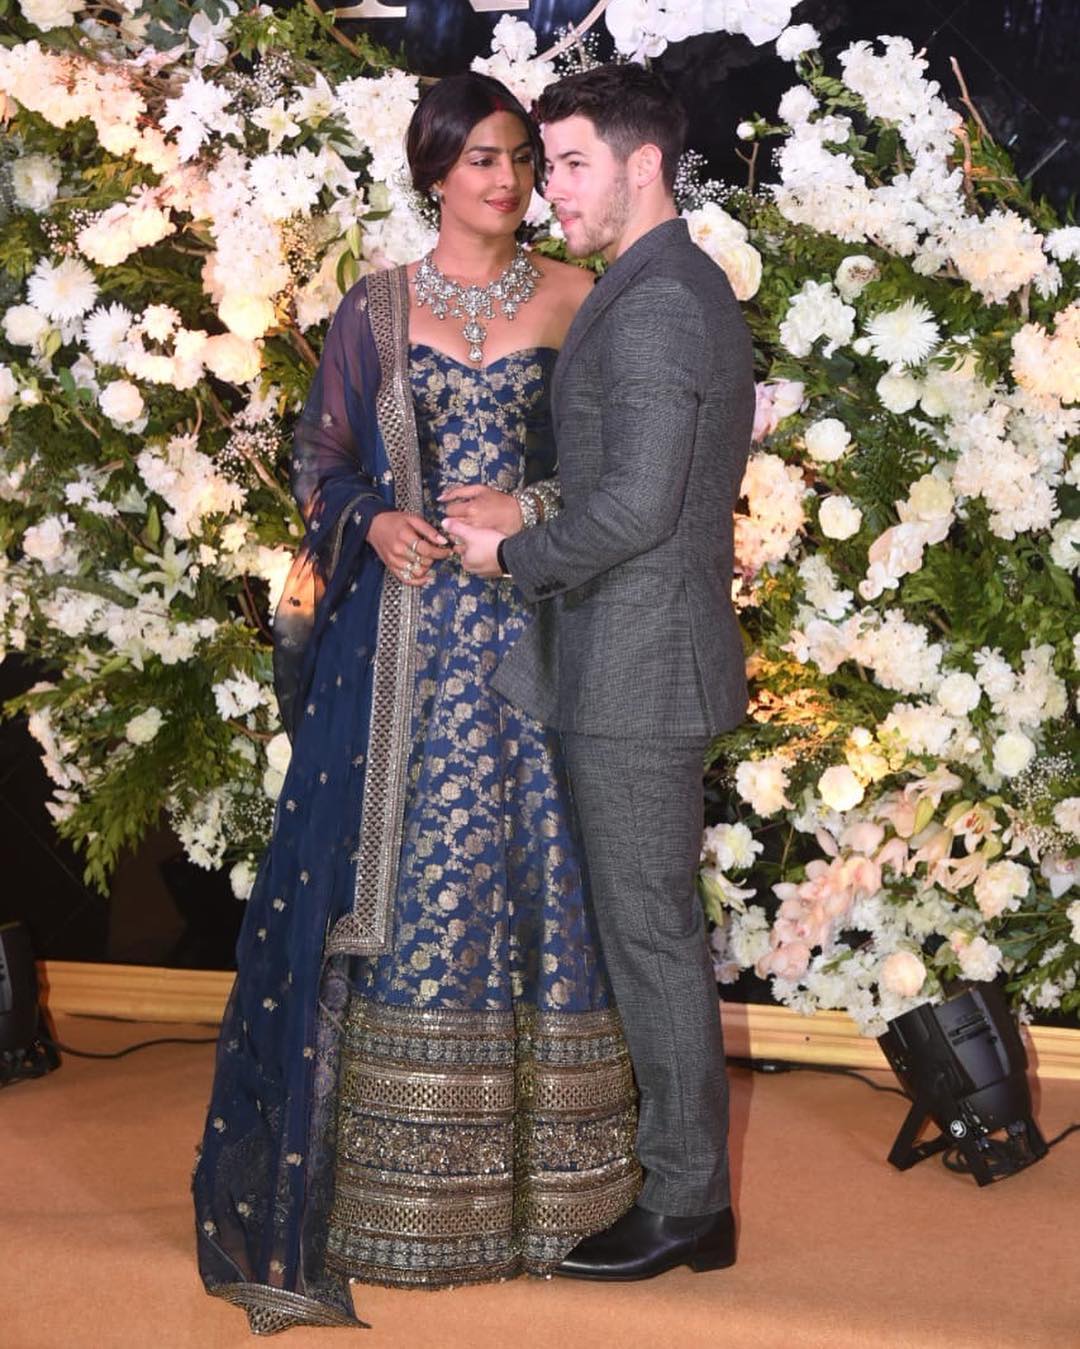 Pictures From Priyanka Chopra And Nick Jonas Mumbai Reception Are Out And The Couple Looked Stunning As Ever